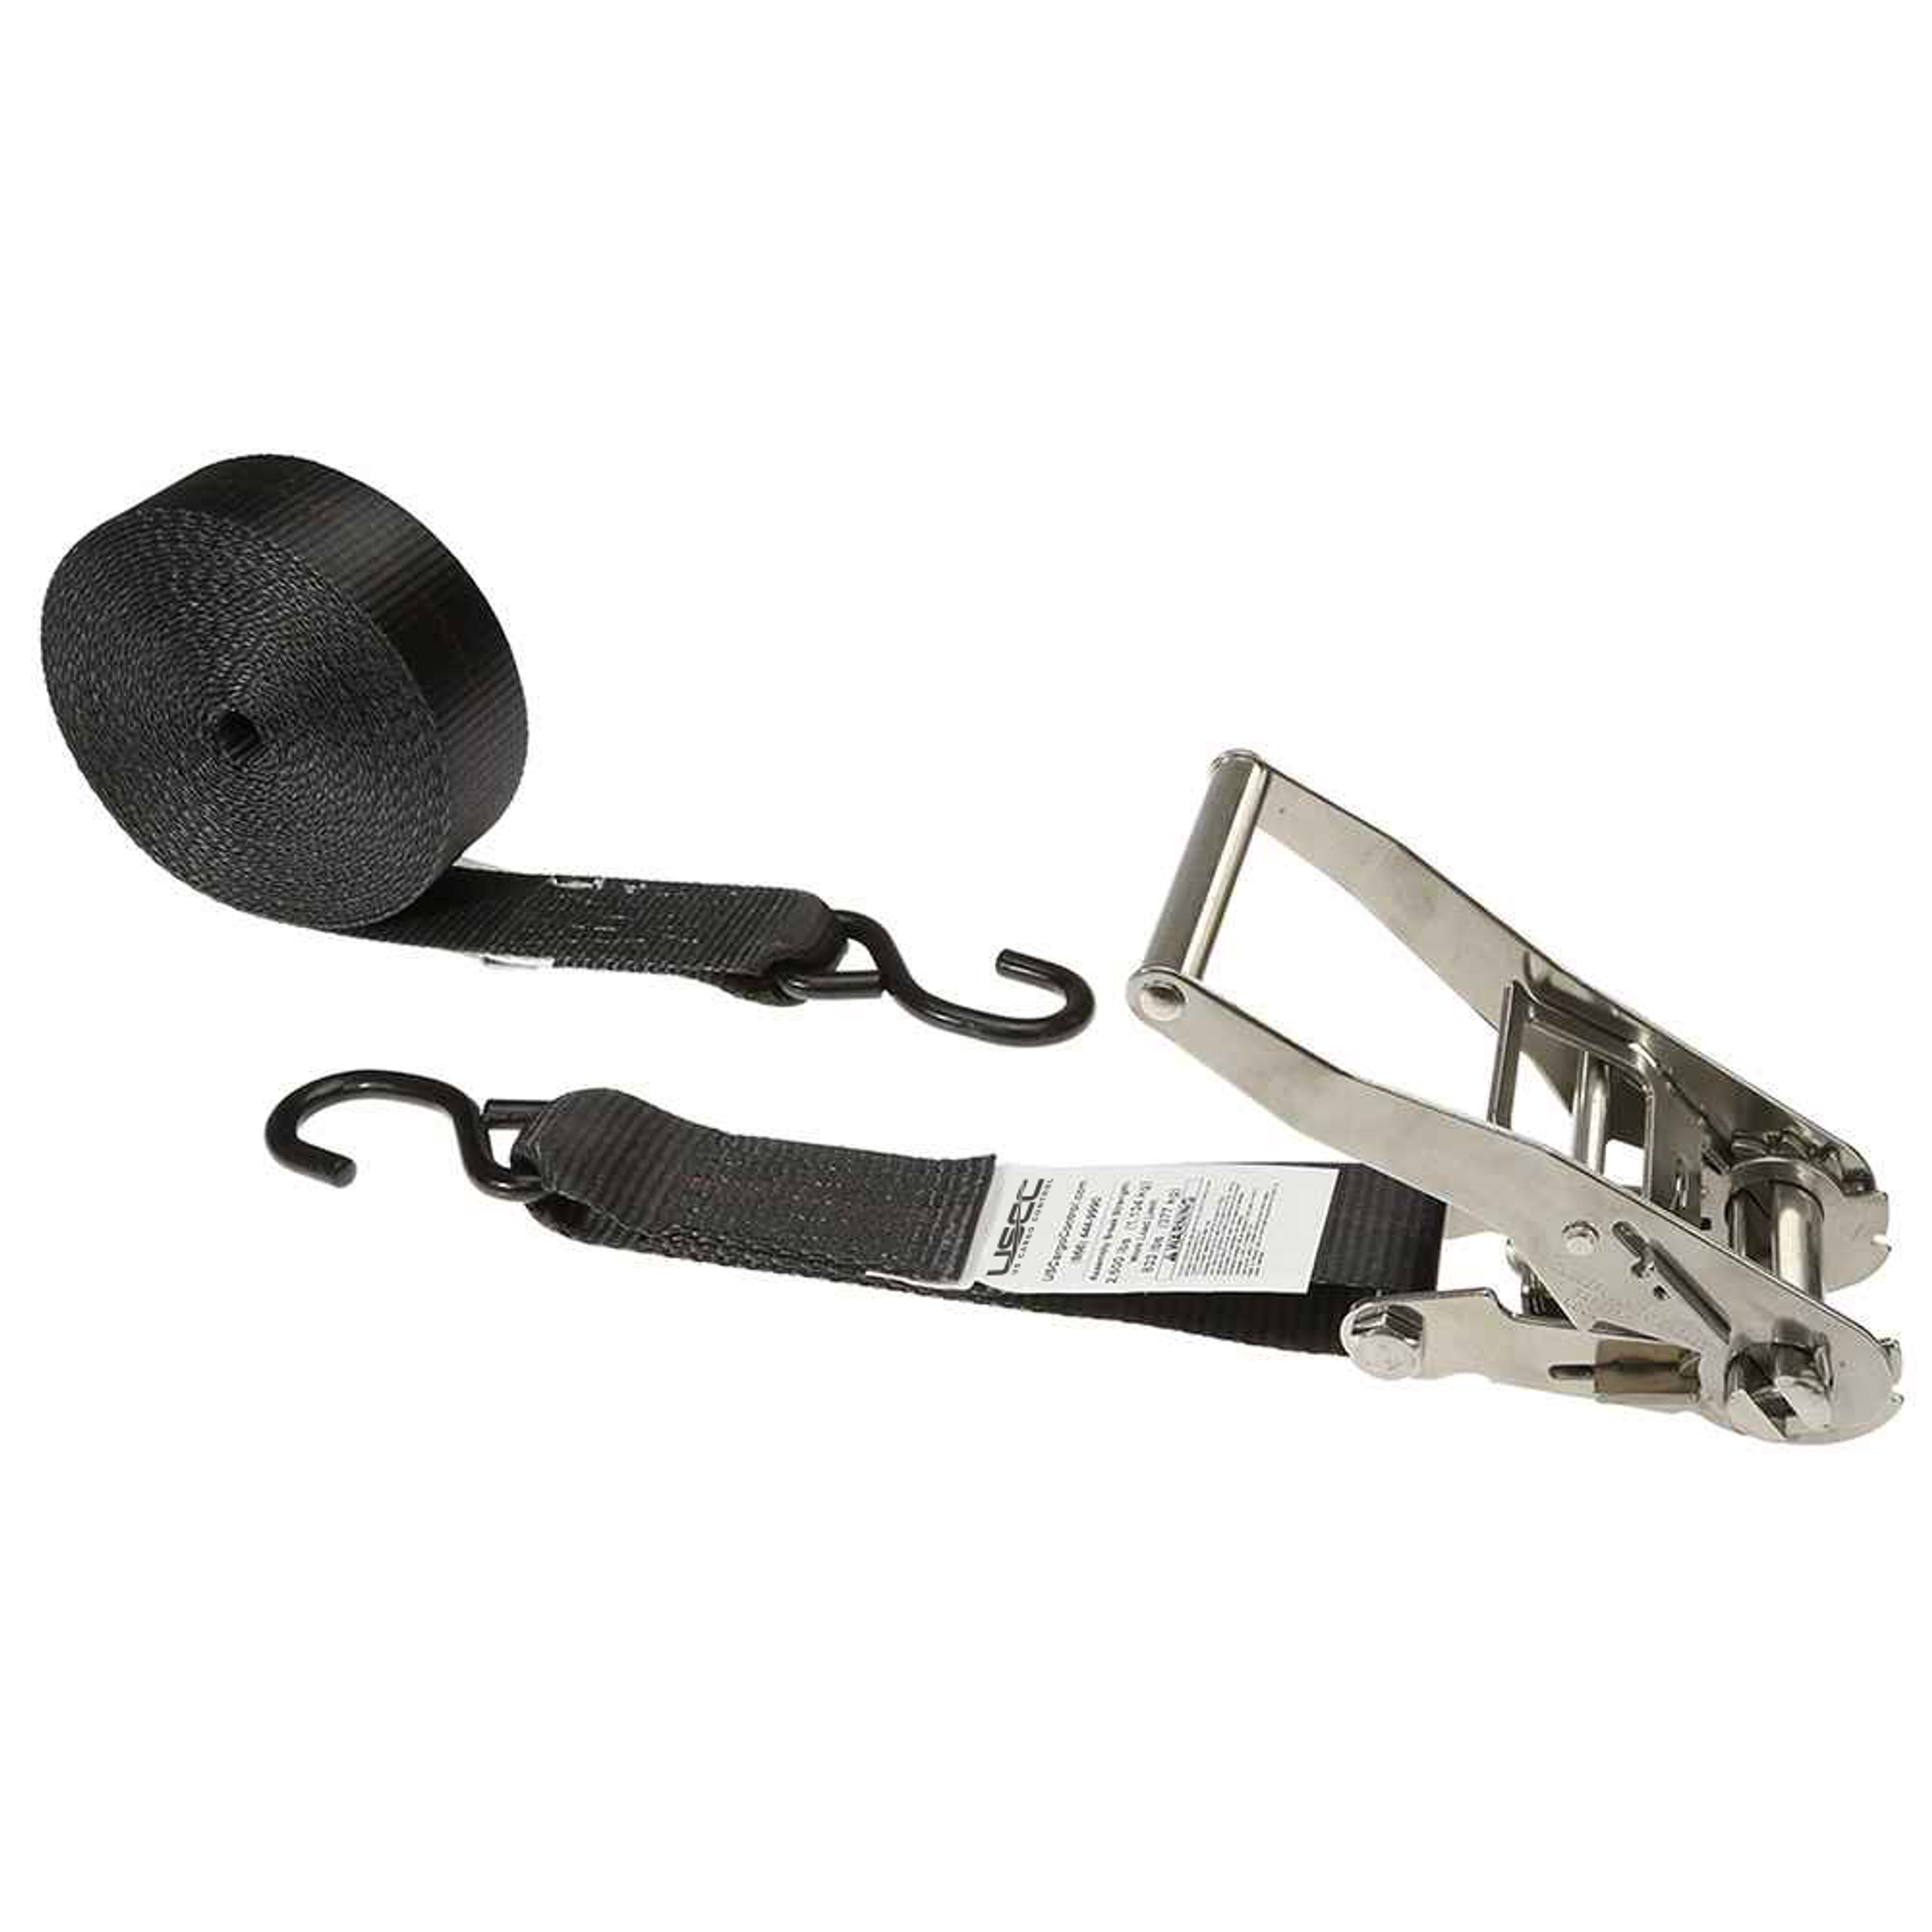 Stainless Steel Ratchet Straps & Stainless Steel Ratchet Tie Downs